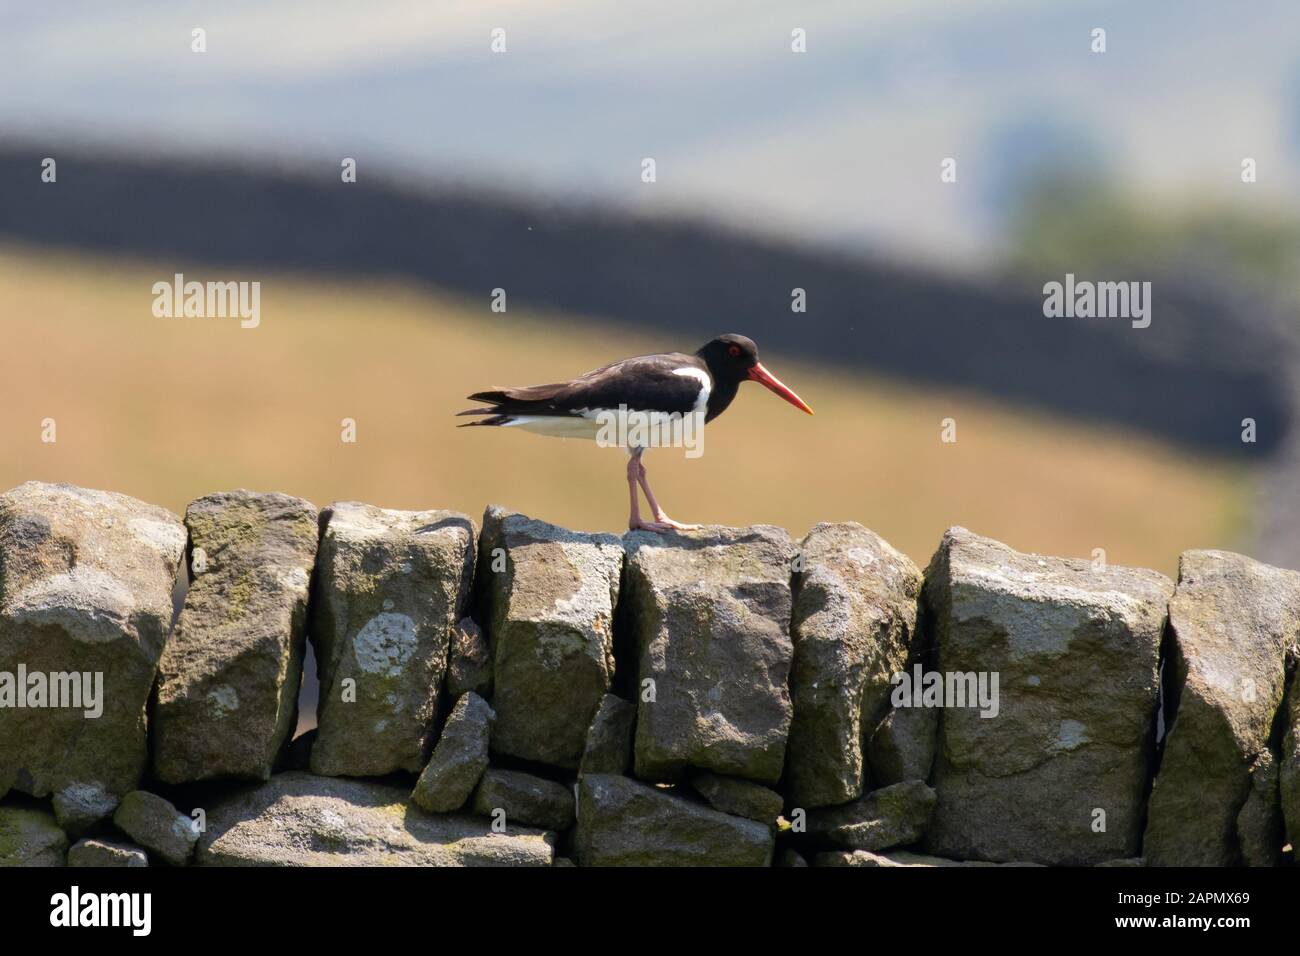 An oystercatcher walking along the top of a dry stone wall in the sunshine Stock Photo